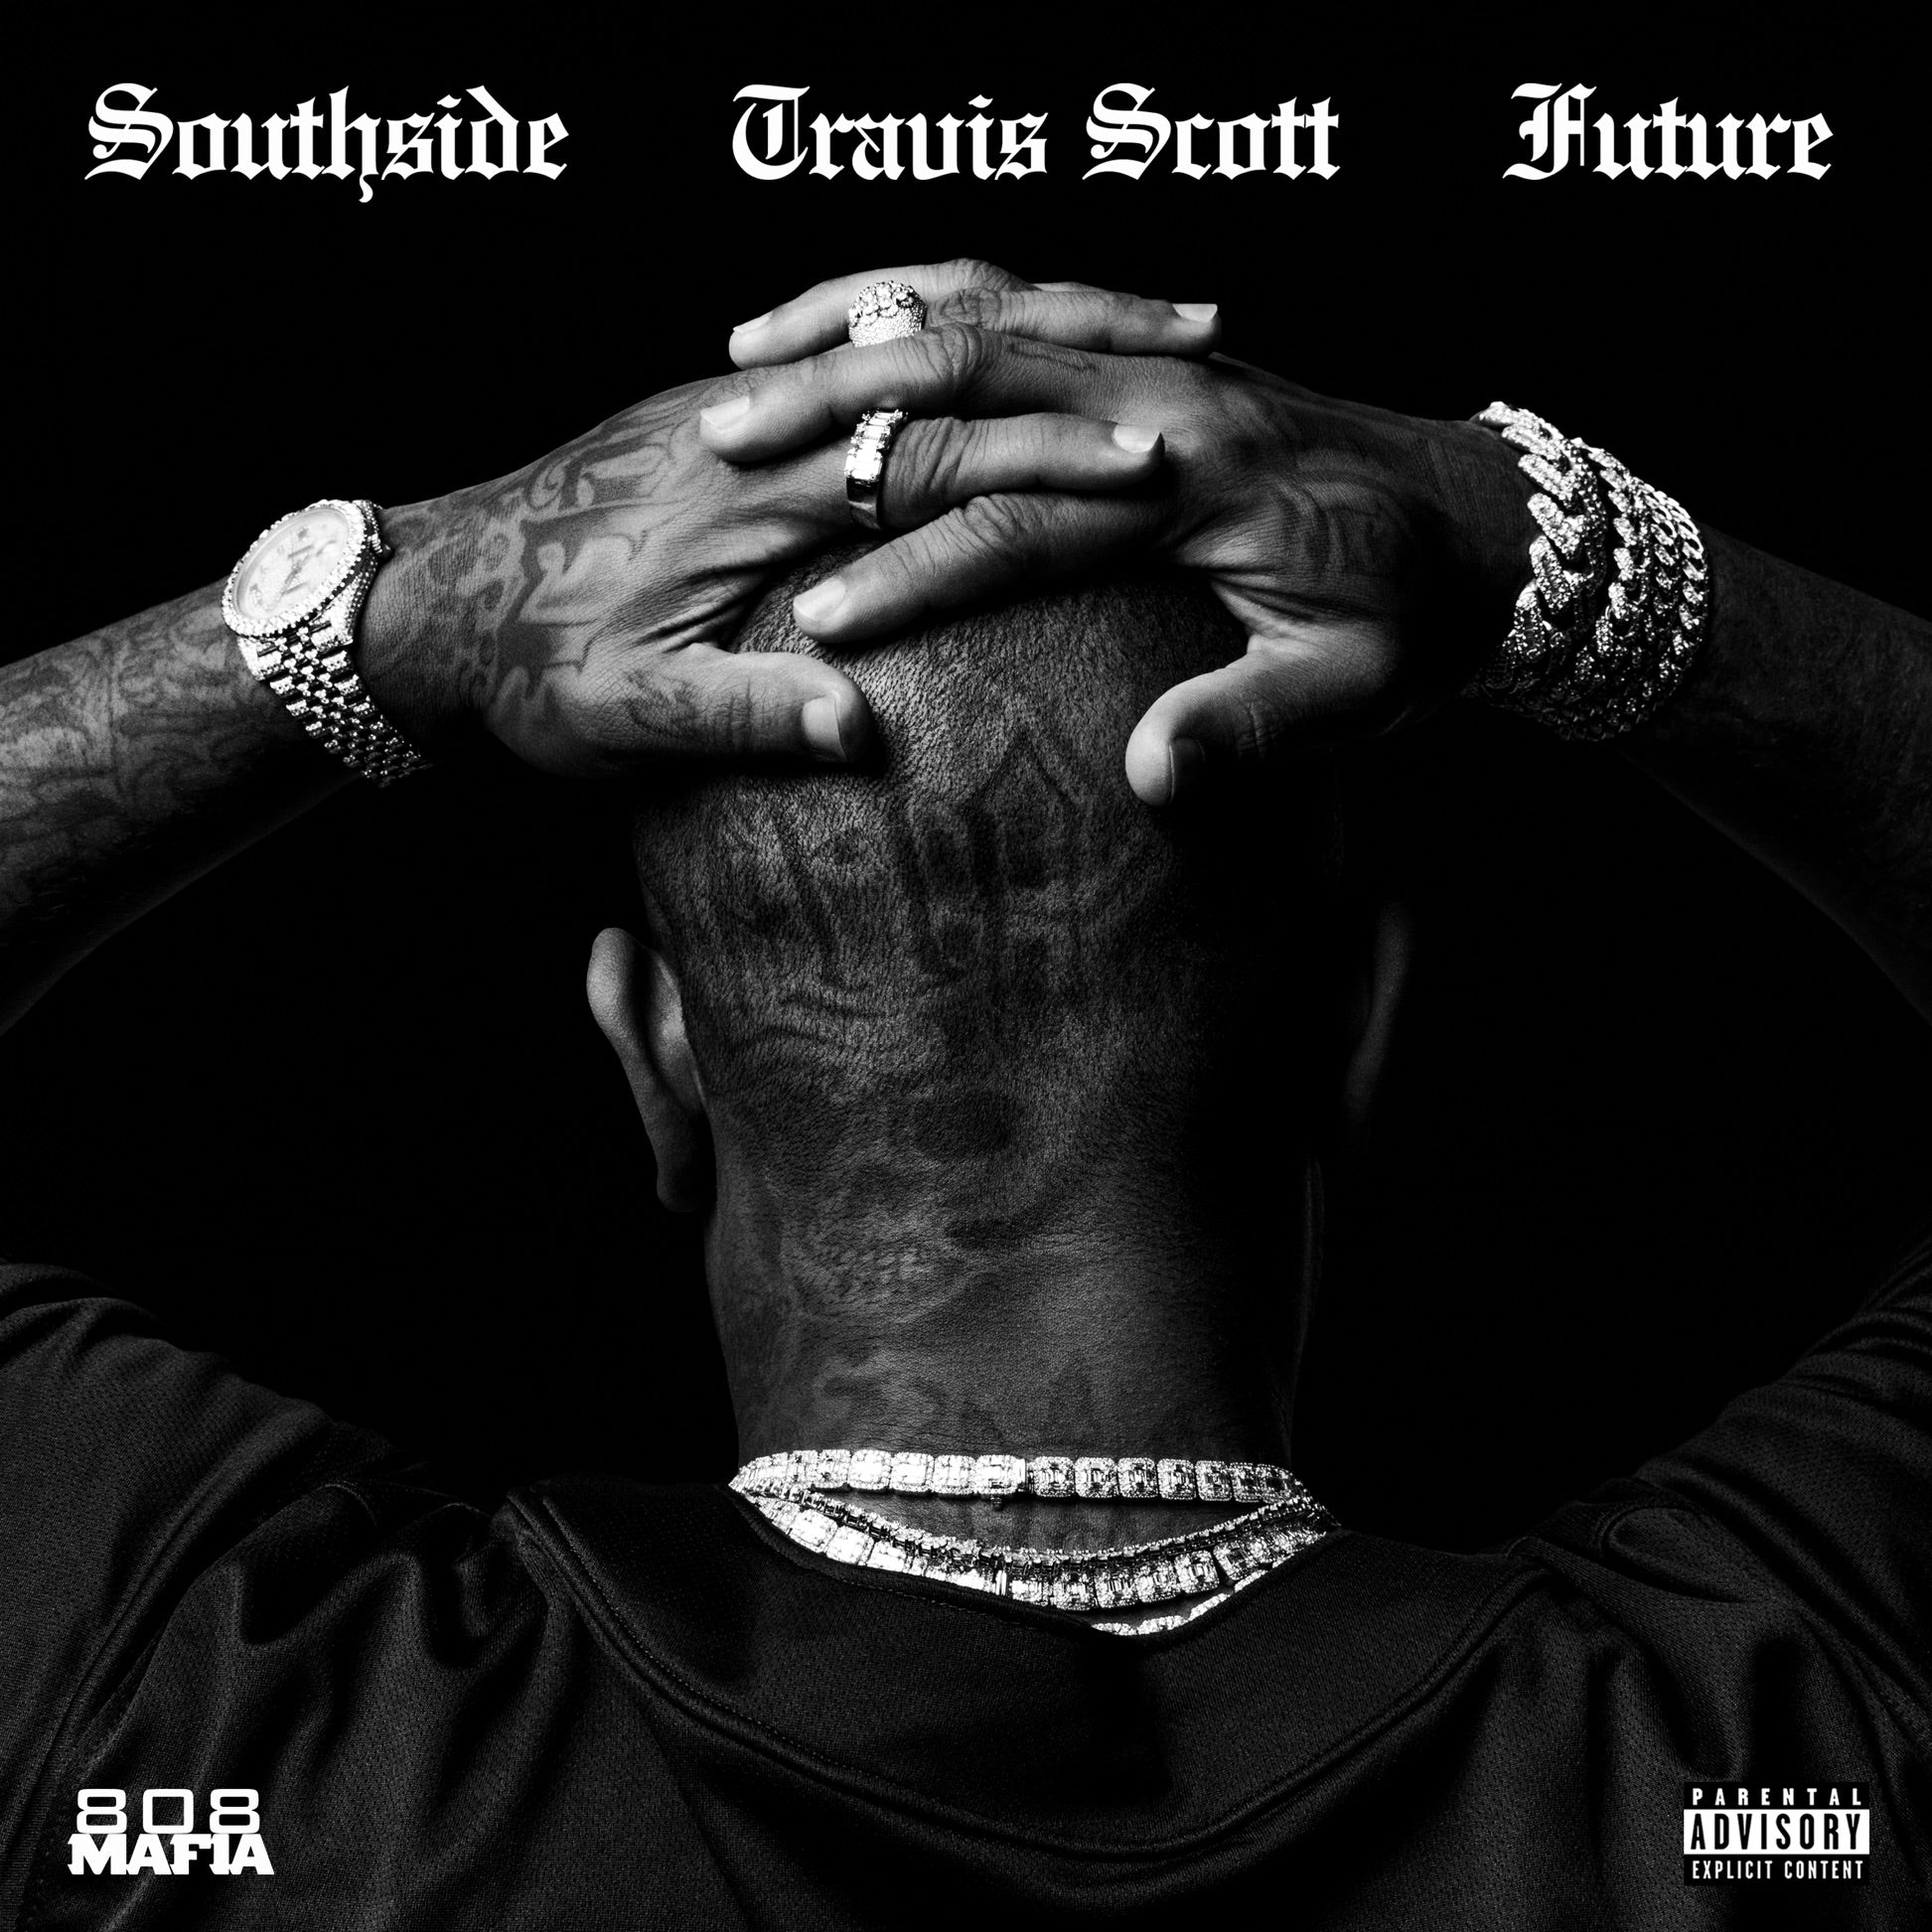 How “Hold That Heat” by Southside & Future ft. Travis Scott